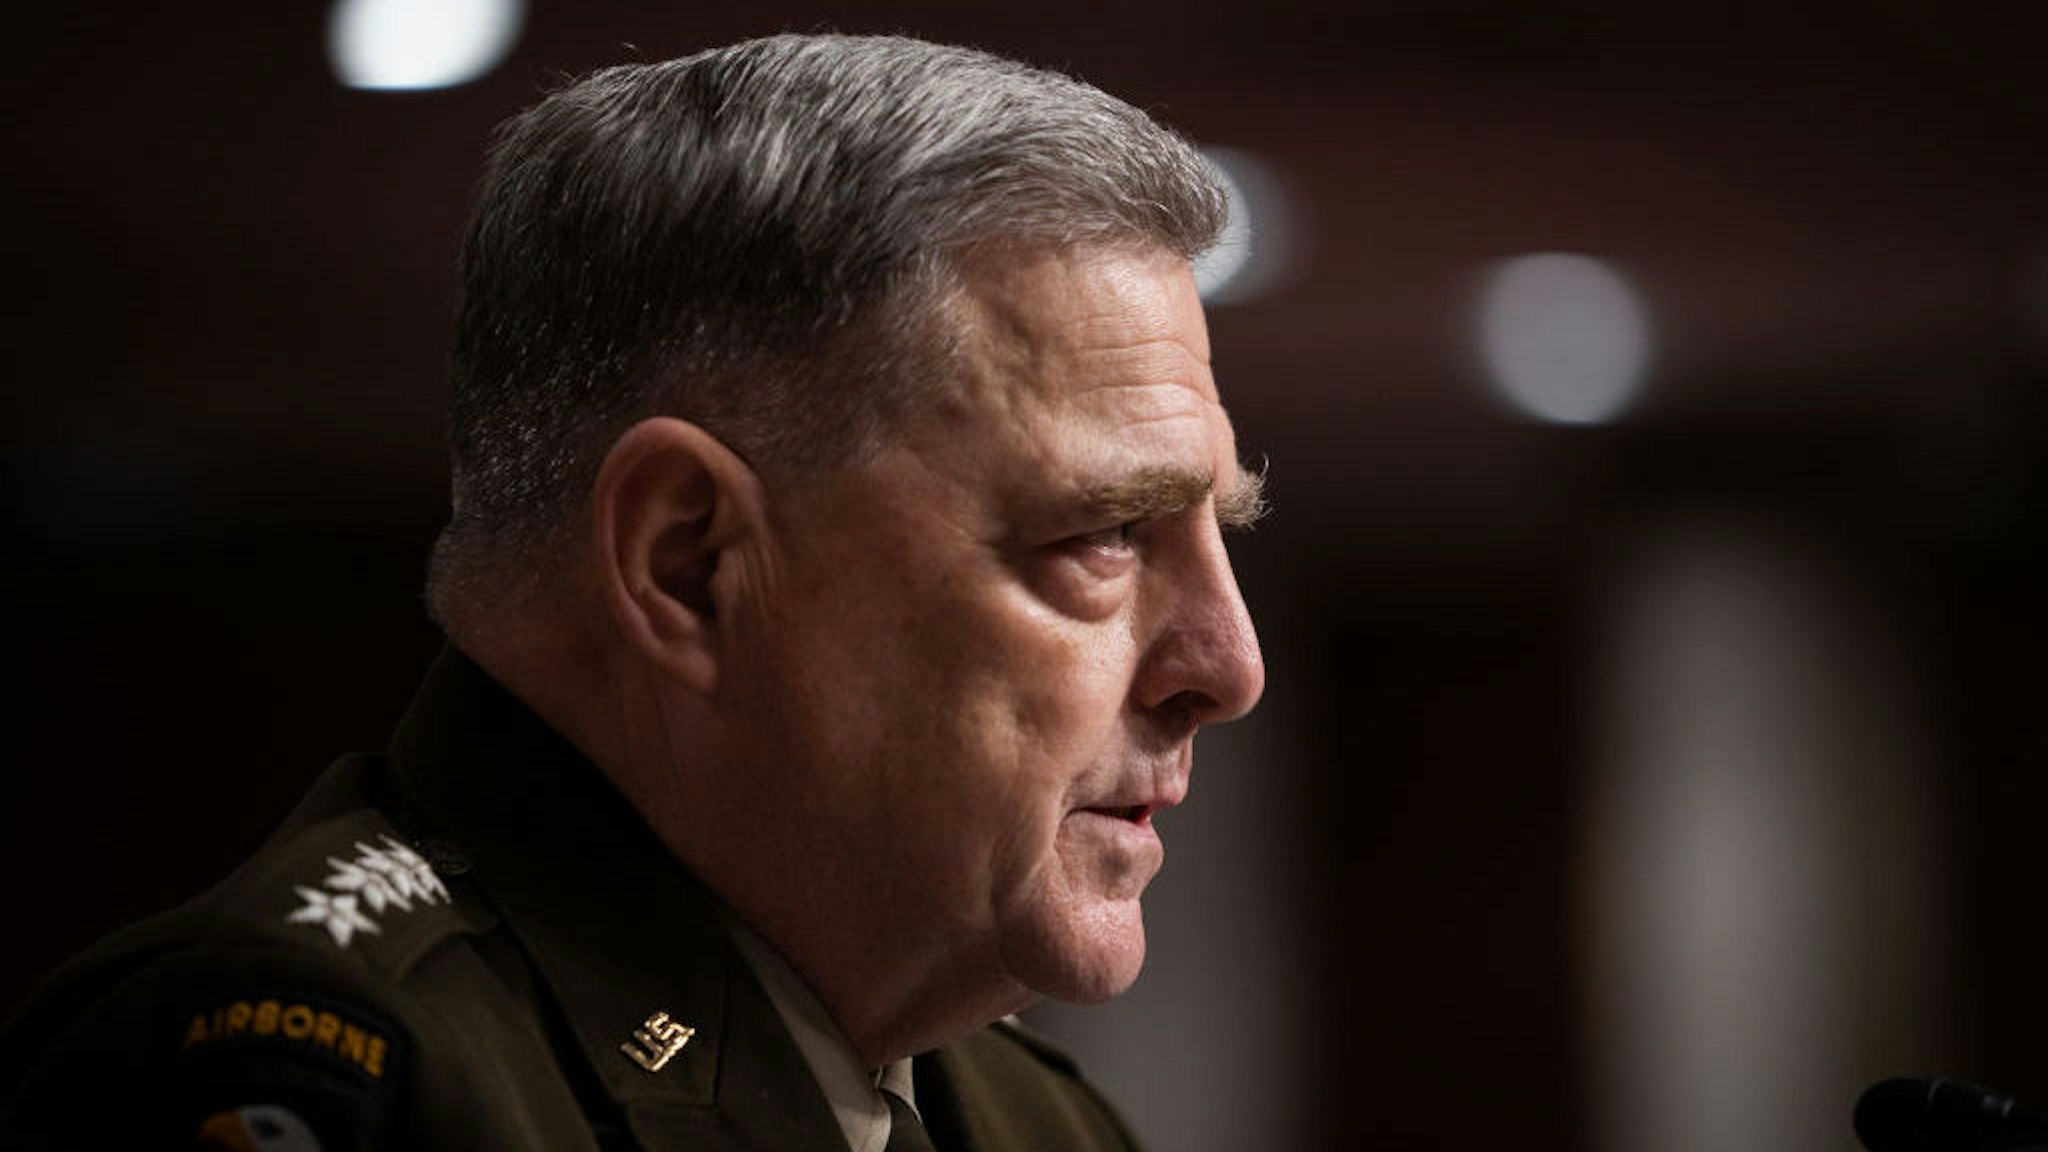 Chairman of the Joint Chiefs of Staff General Mark A. Milley testifies during a Senate Armed Services Committee hearing on the conclusion of military operations in Afghanistan and plans for future counterterrorism operations at the U.S. Capitol in Washington, D.C. on Tuesday, September 28, 2021. (Sarahbeth Maney/The New York Times)